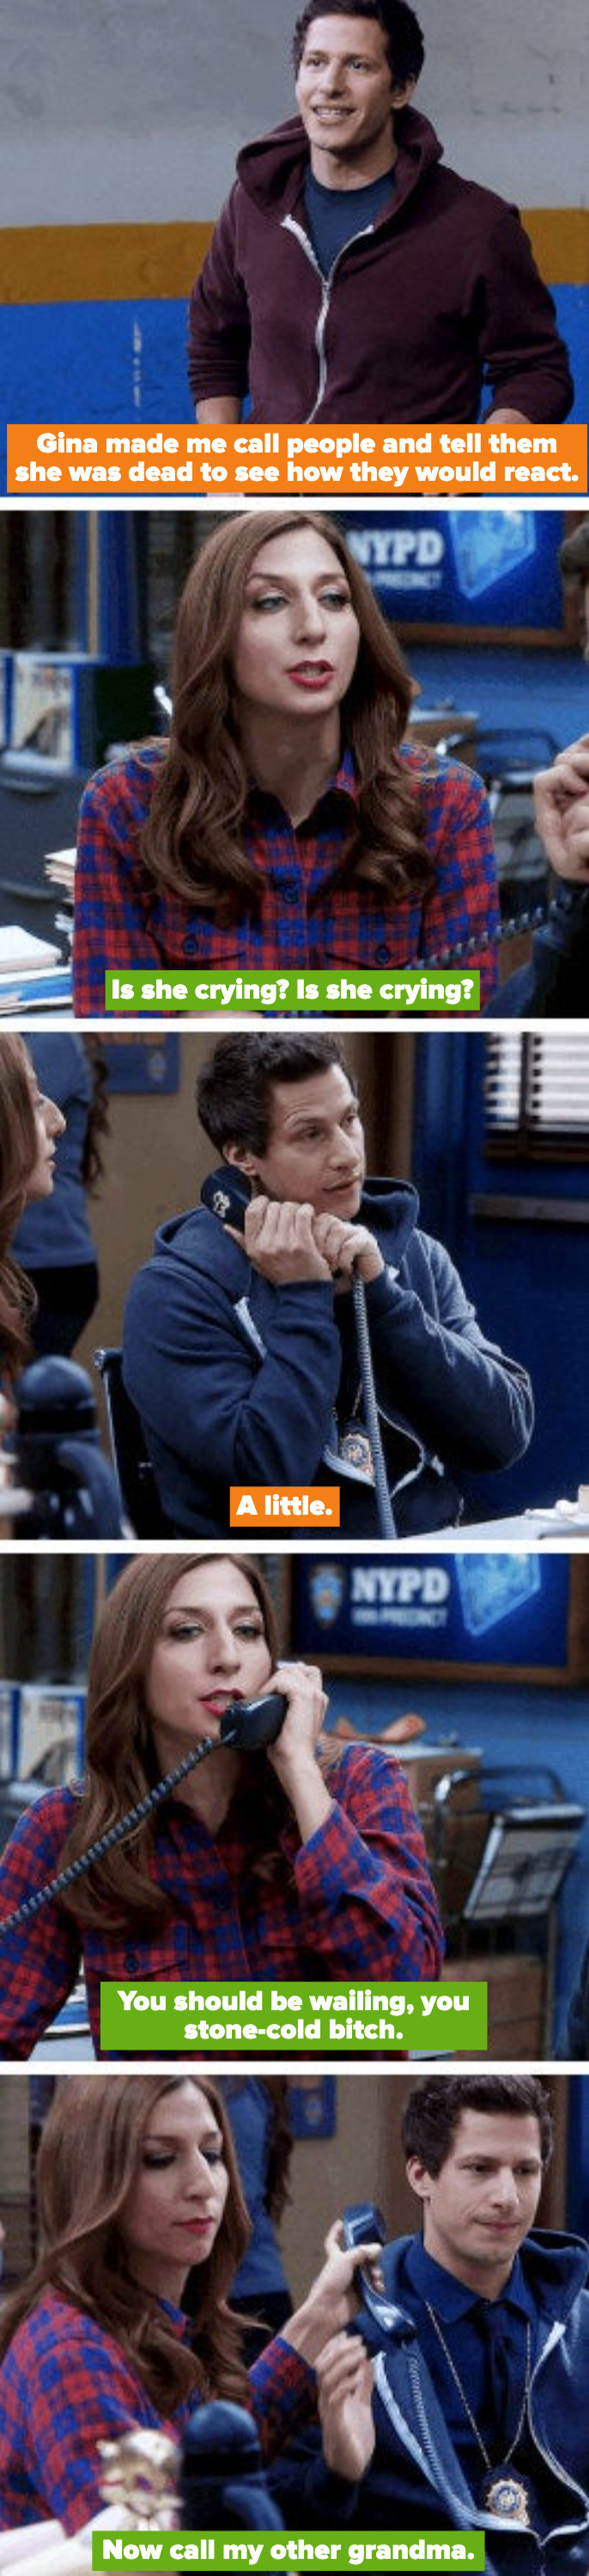 Gina asking Jake if her grandma is crying on the phone after he told her Gina was dead